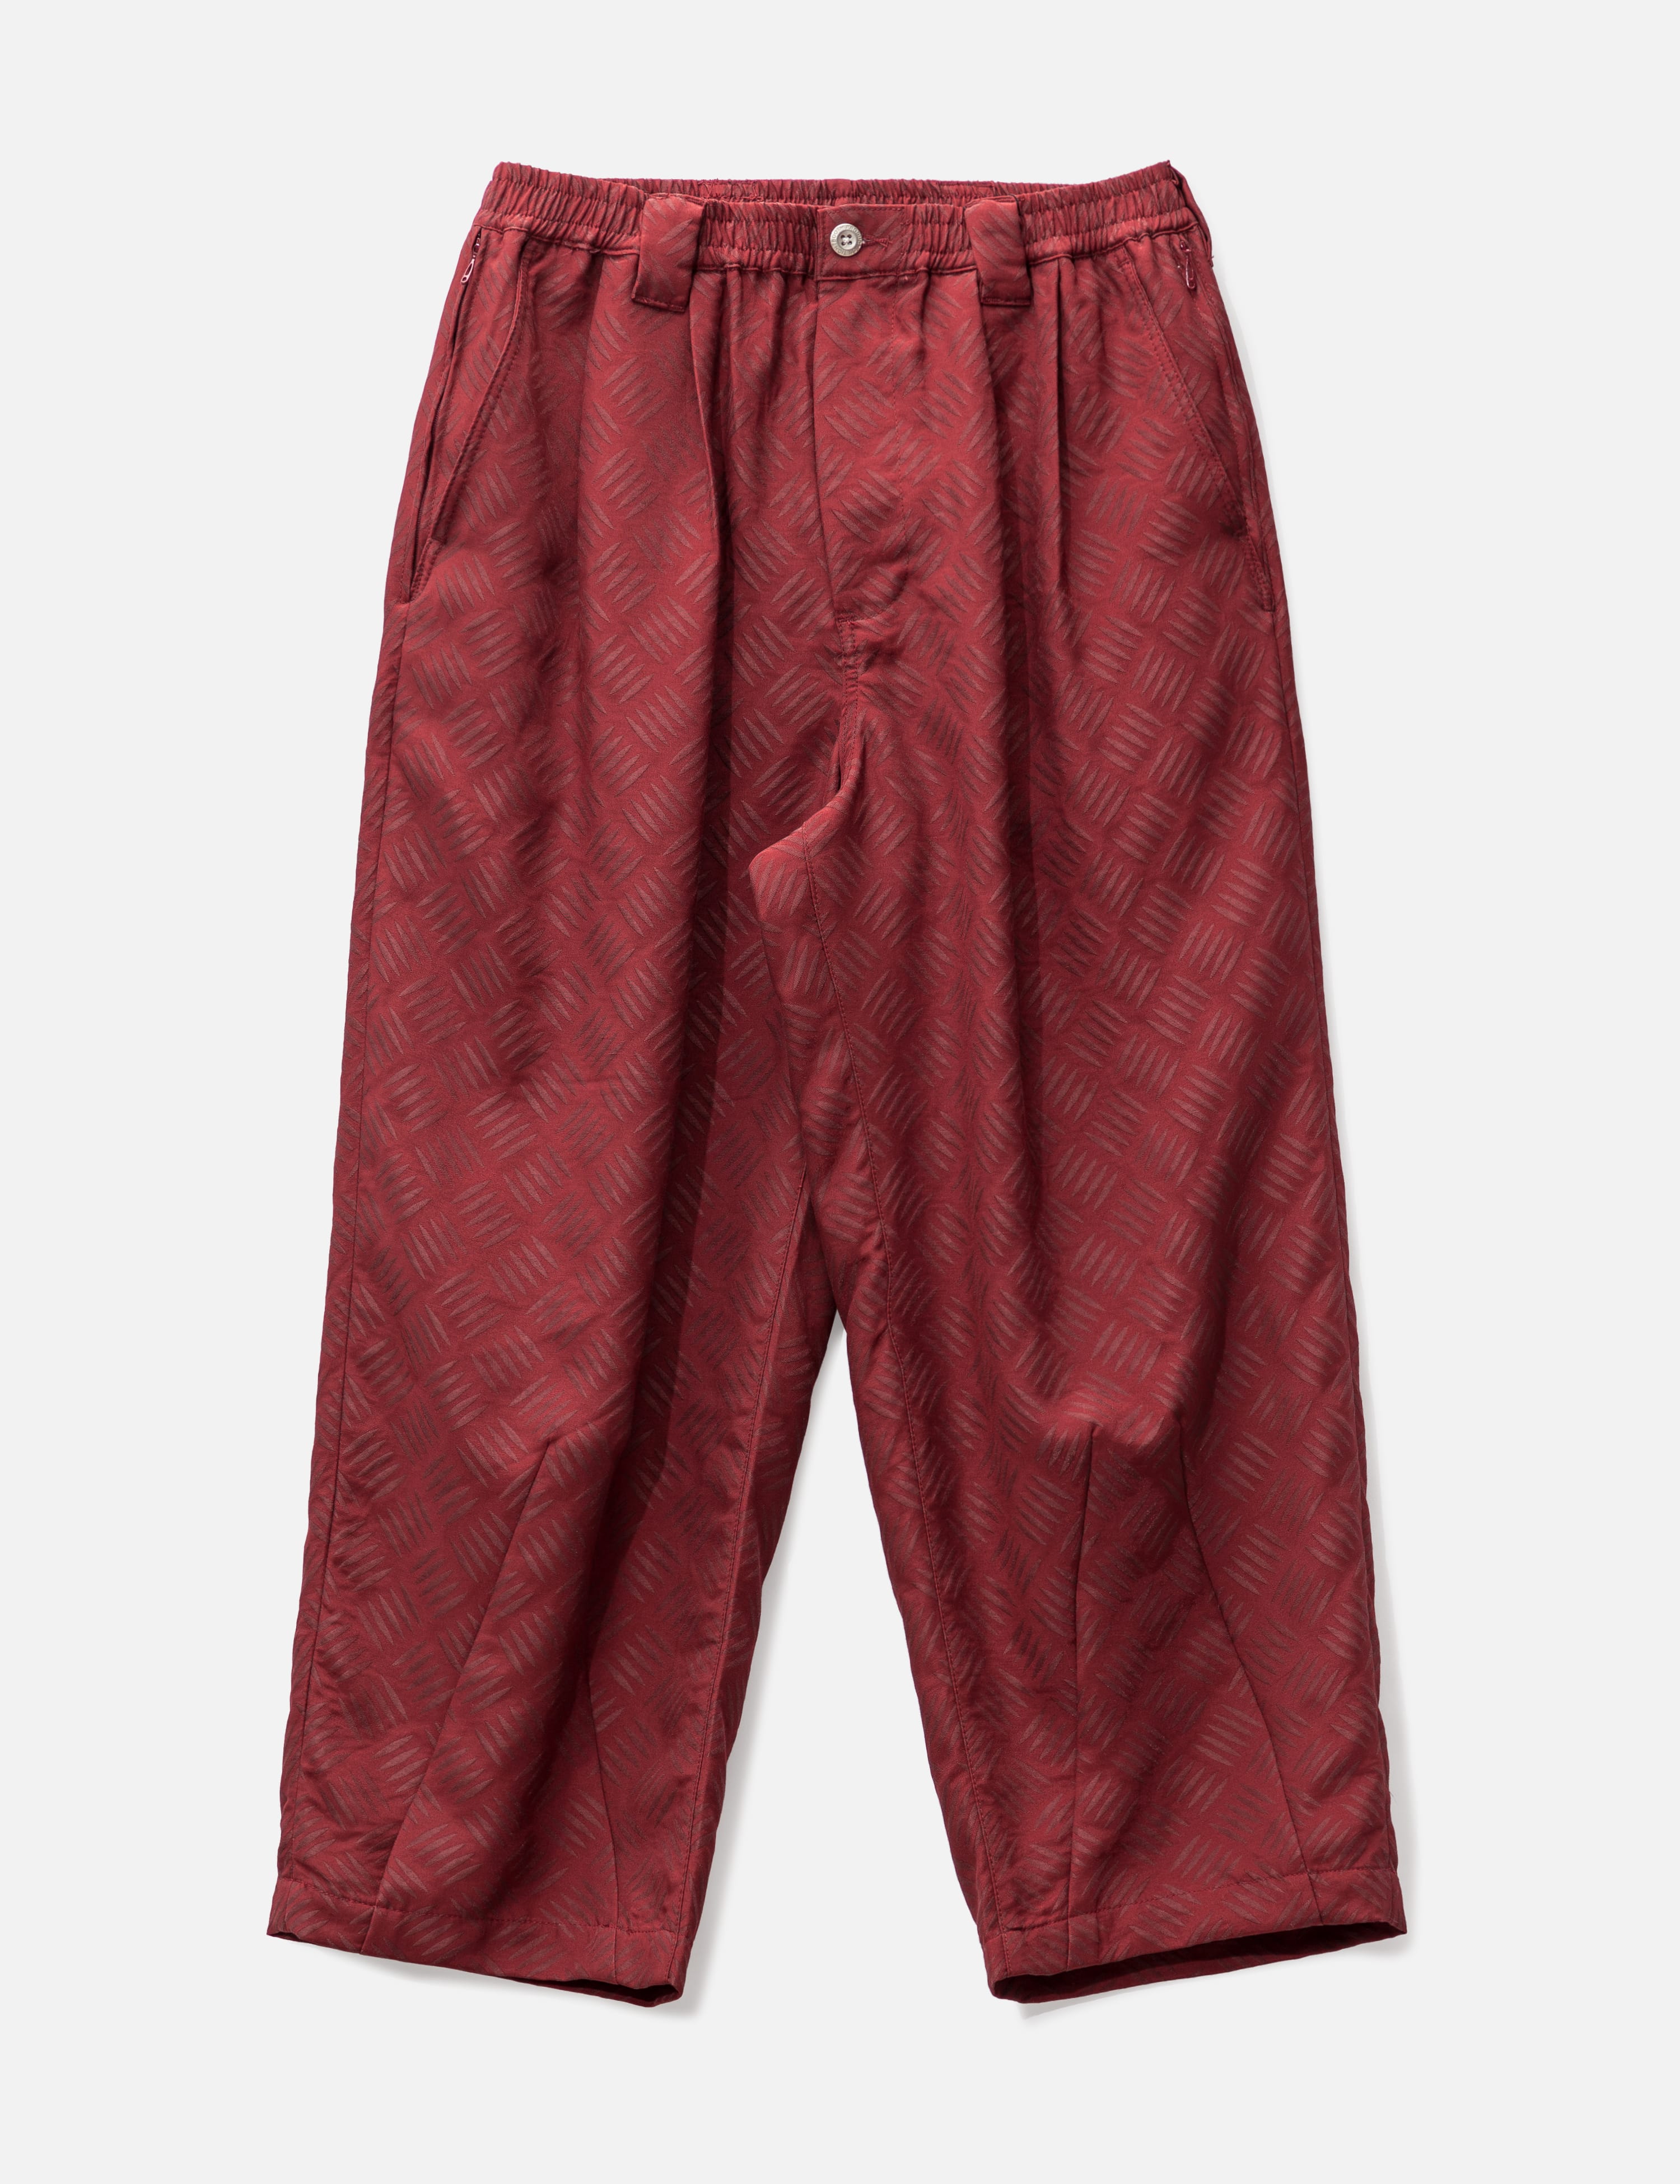 TIGHTBOOTH - CHECKER PLATE BAGGY SLACKS | HBX - Globally Curated